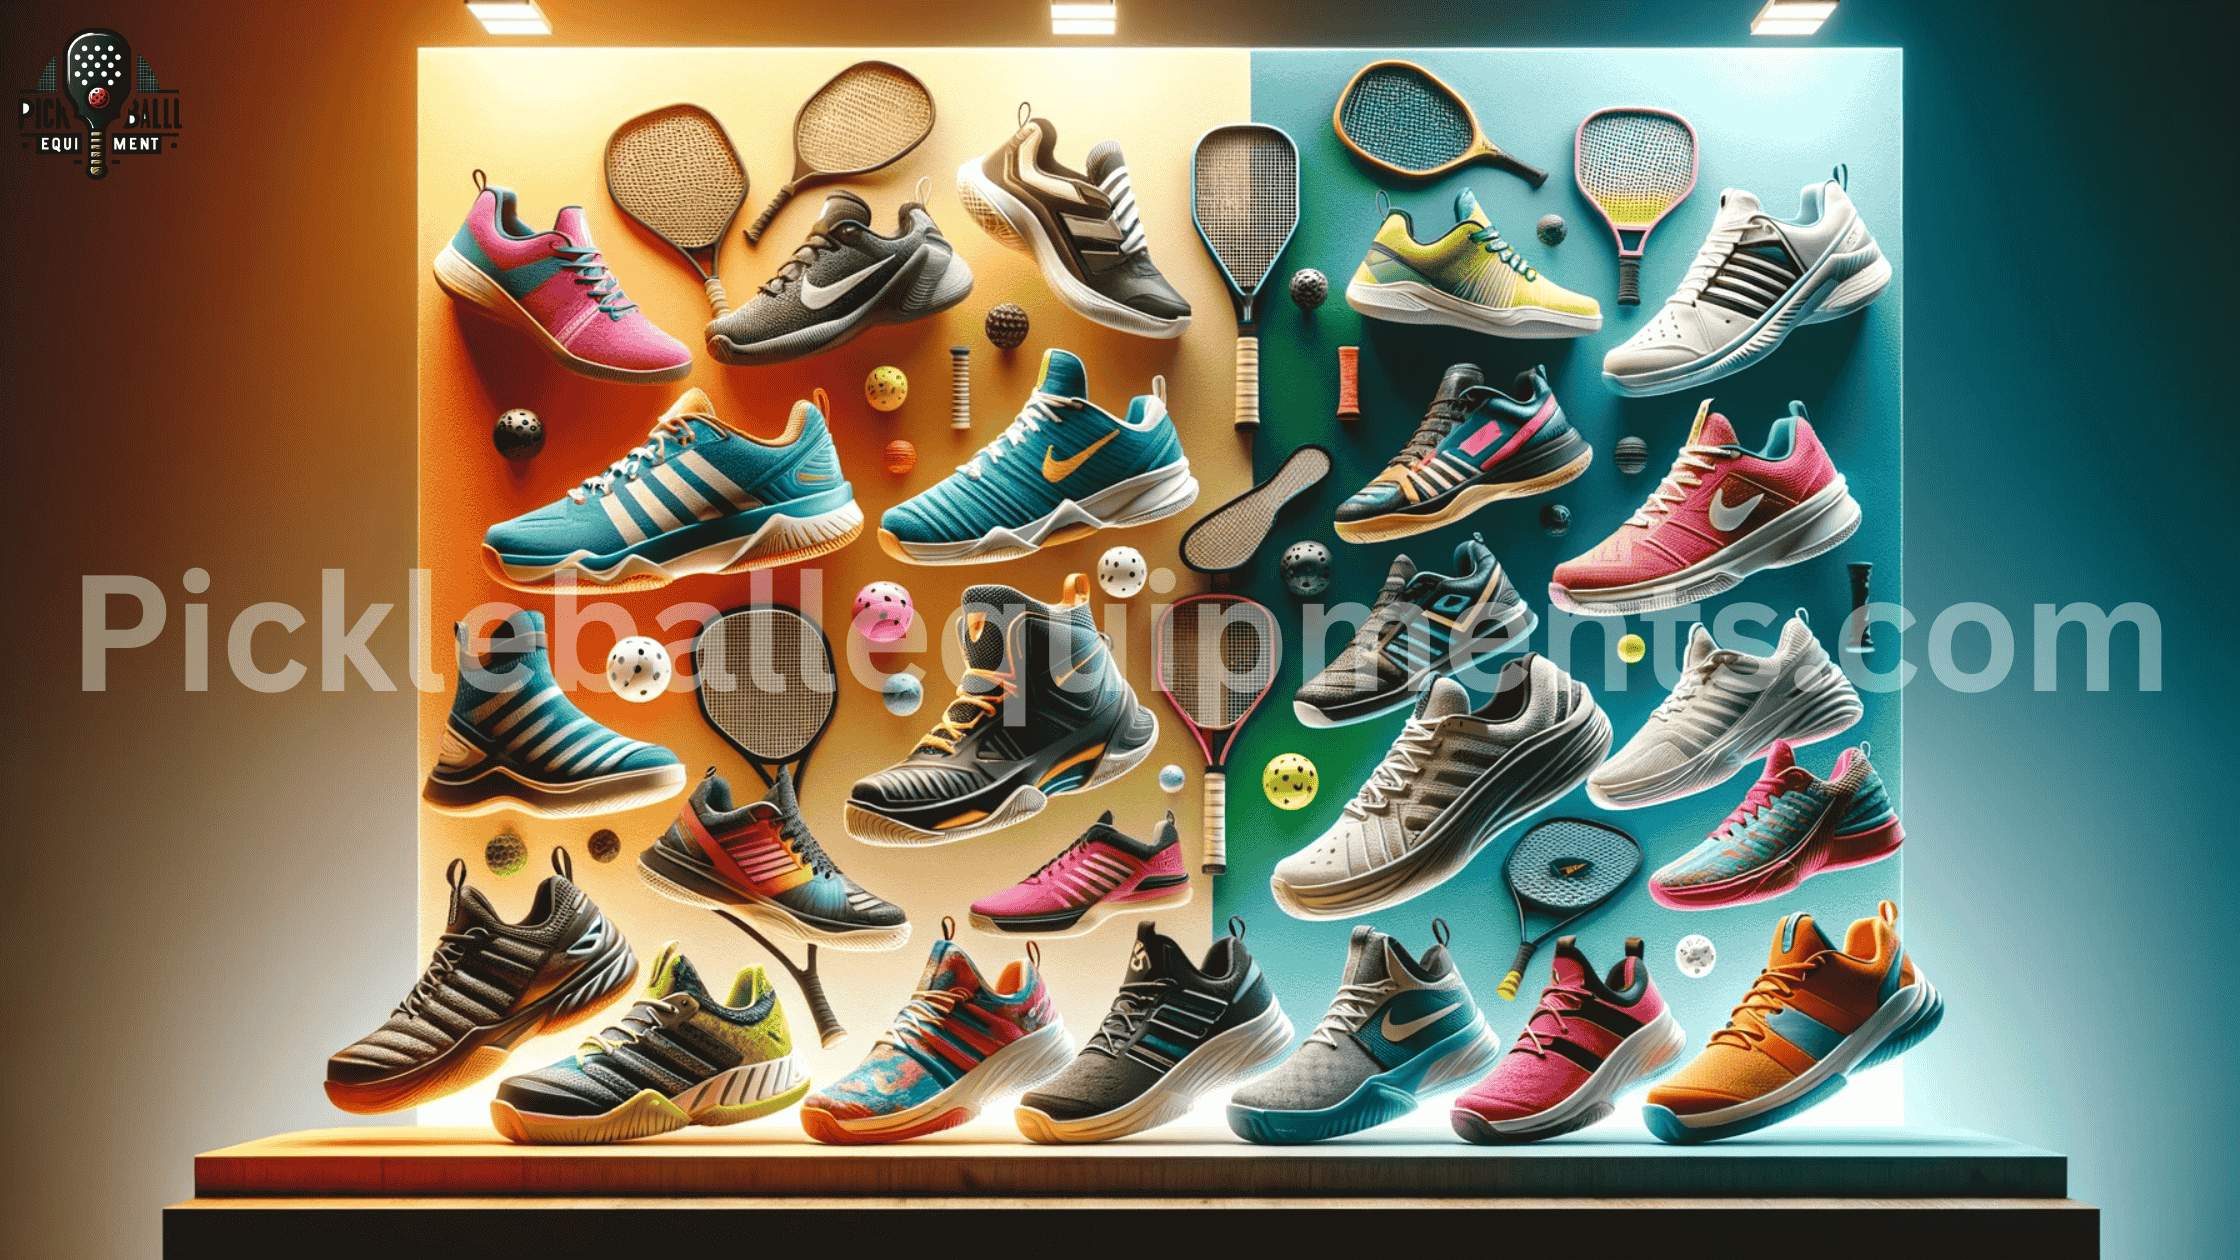 Best Pickleball Shoes for Men and Women